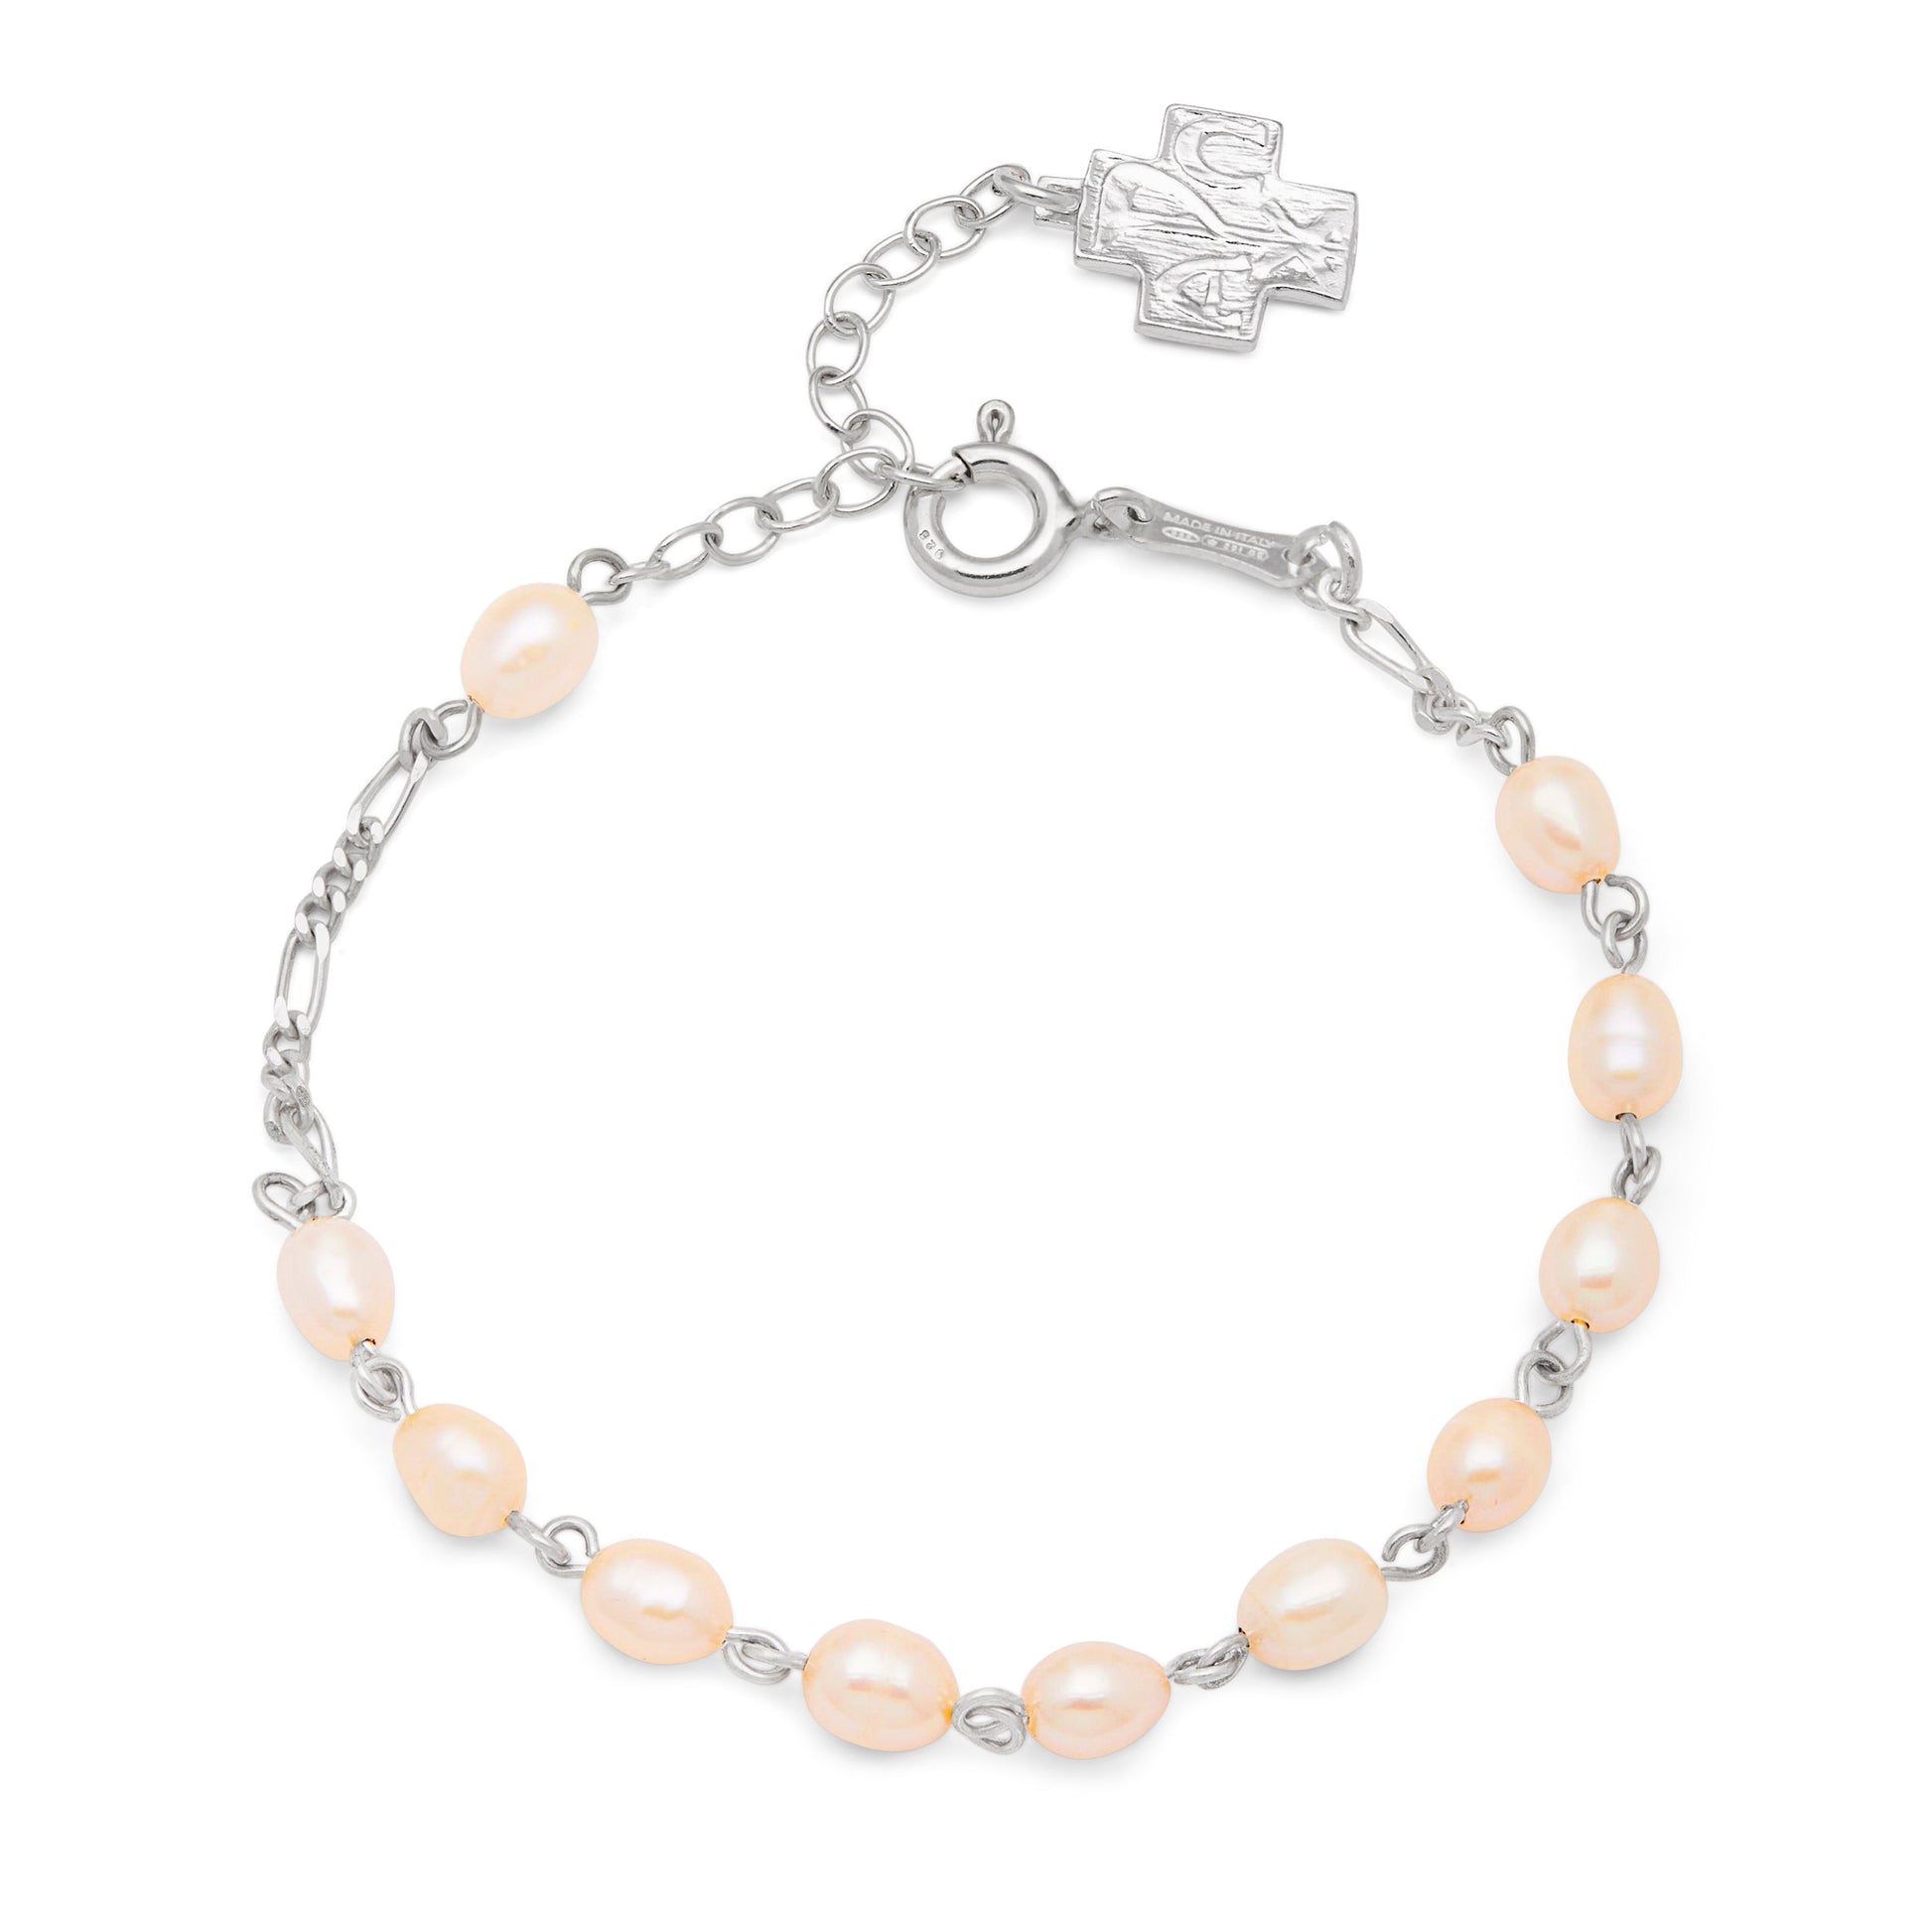 MONDO CATTOLICO Prayer Beads Adjustable Freshwater Pearls Rosary Bracelet in Sterling Silver